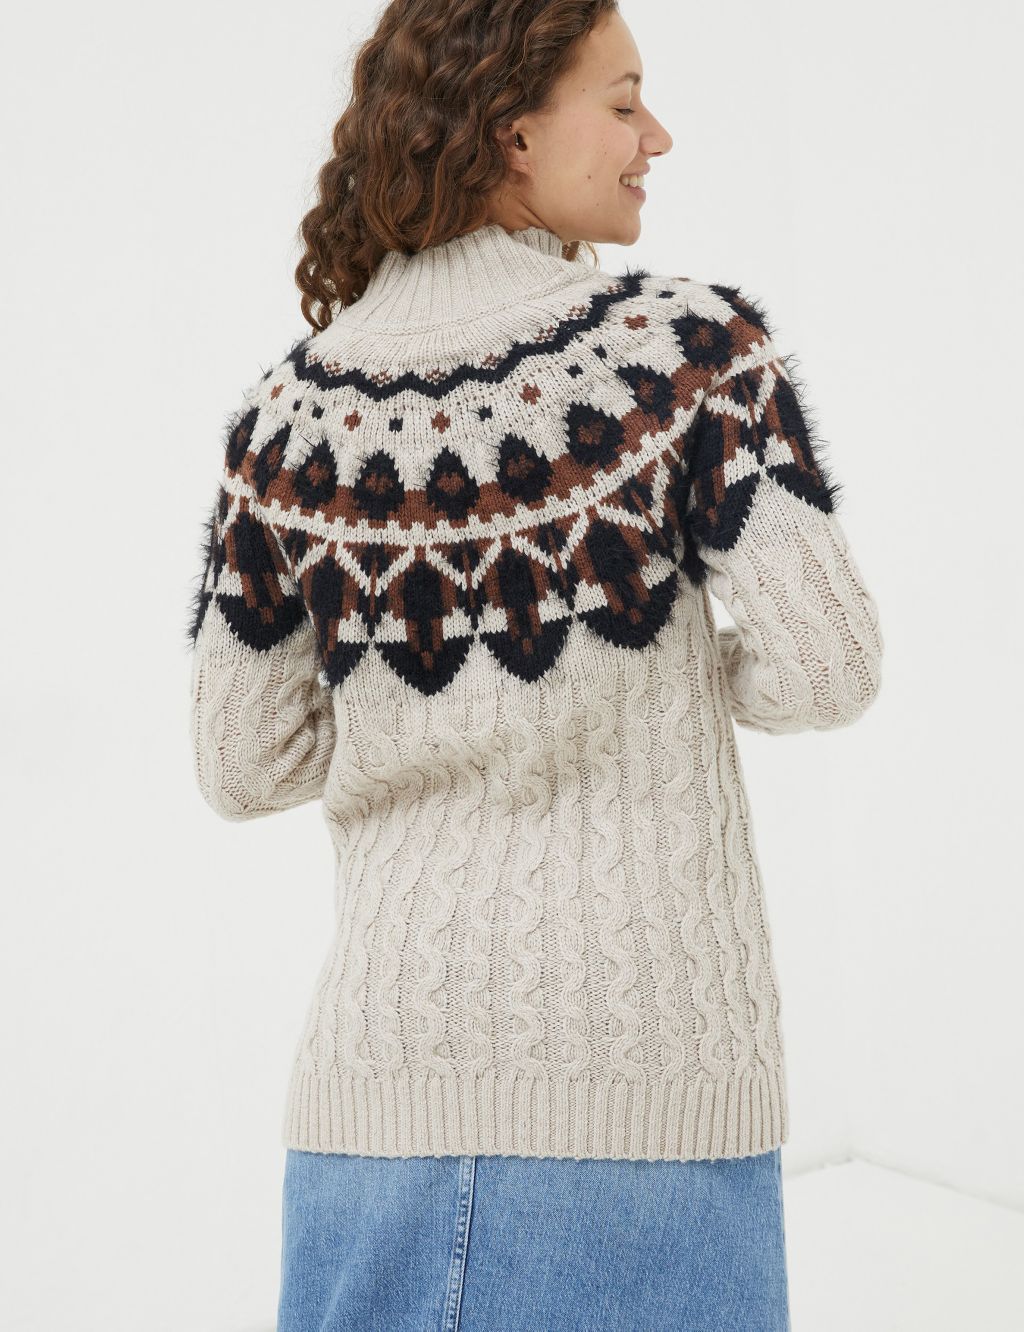 Wool Blend Fair Isle Cable Knit Tunic image 3